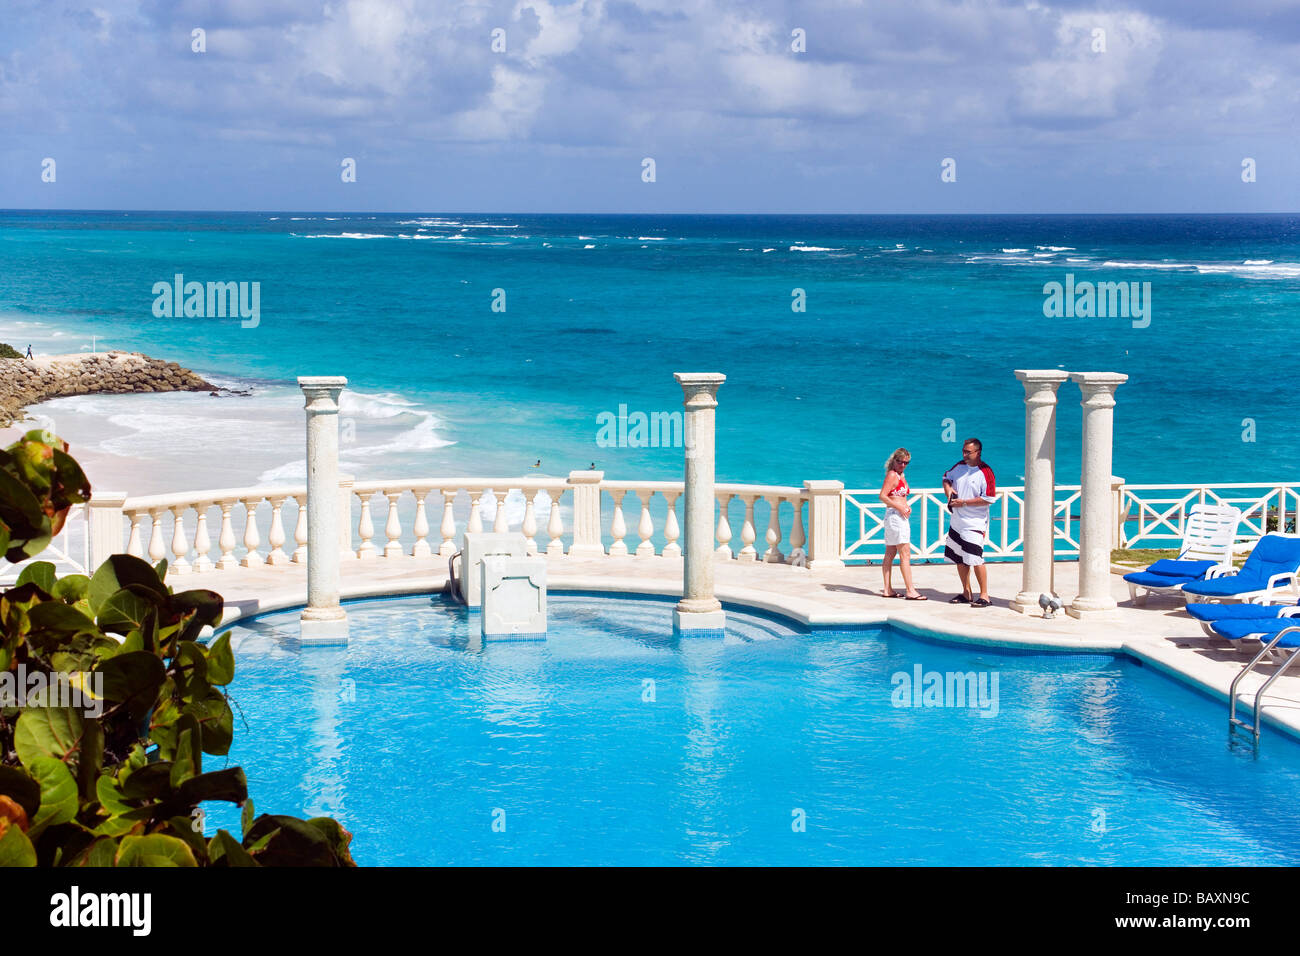 Vacationer at swimming pool of the Crane Hotel, Atlantic Ocean in background, Barbados, Caribbean Stock Photo